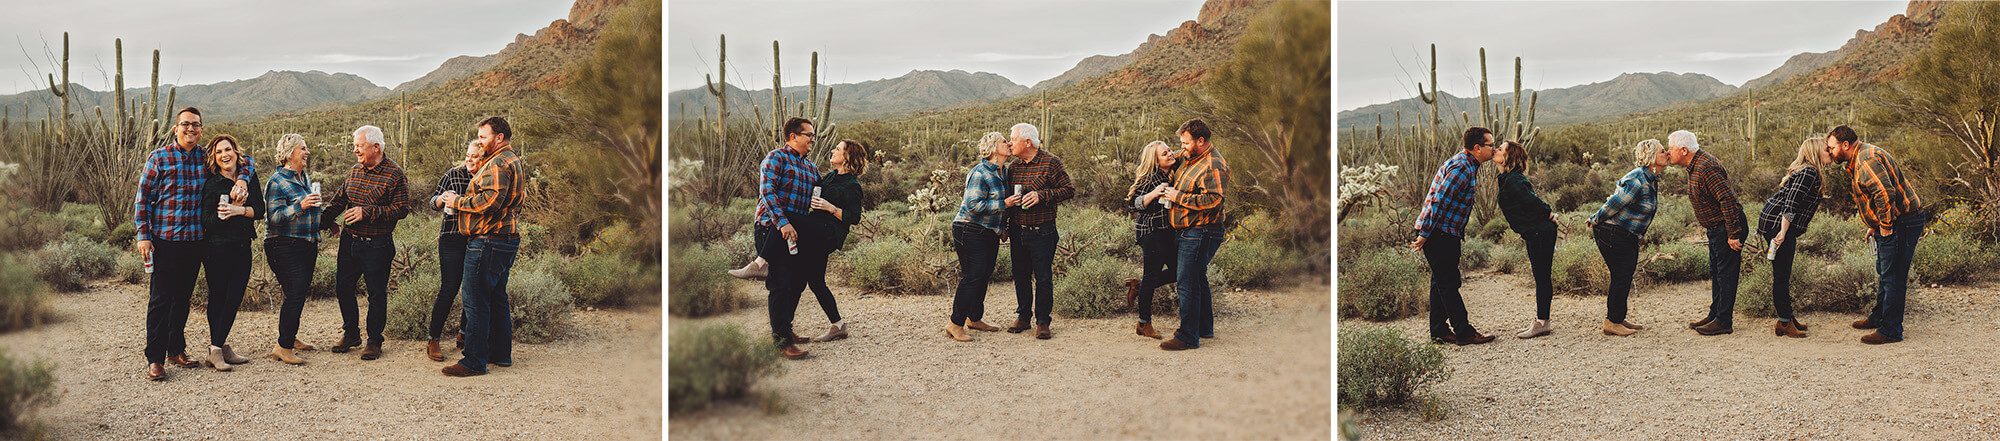 The Lindley family playfully posing at they sip on beers during their family photo session in Tucson